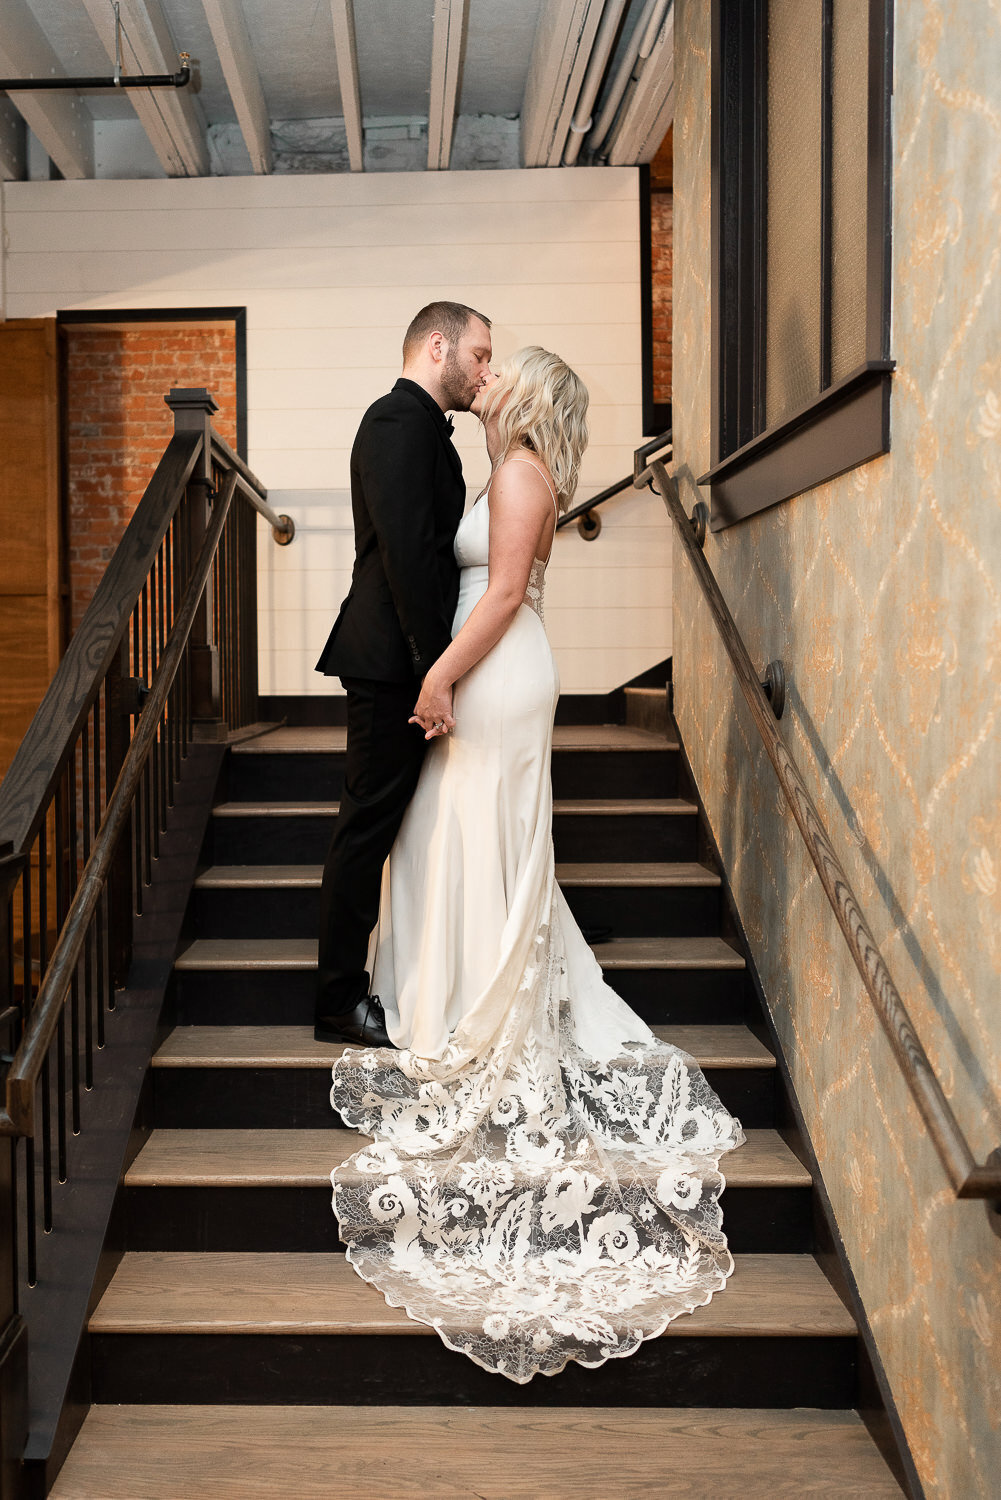 Bride and groom kiss on the stairs.